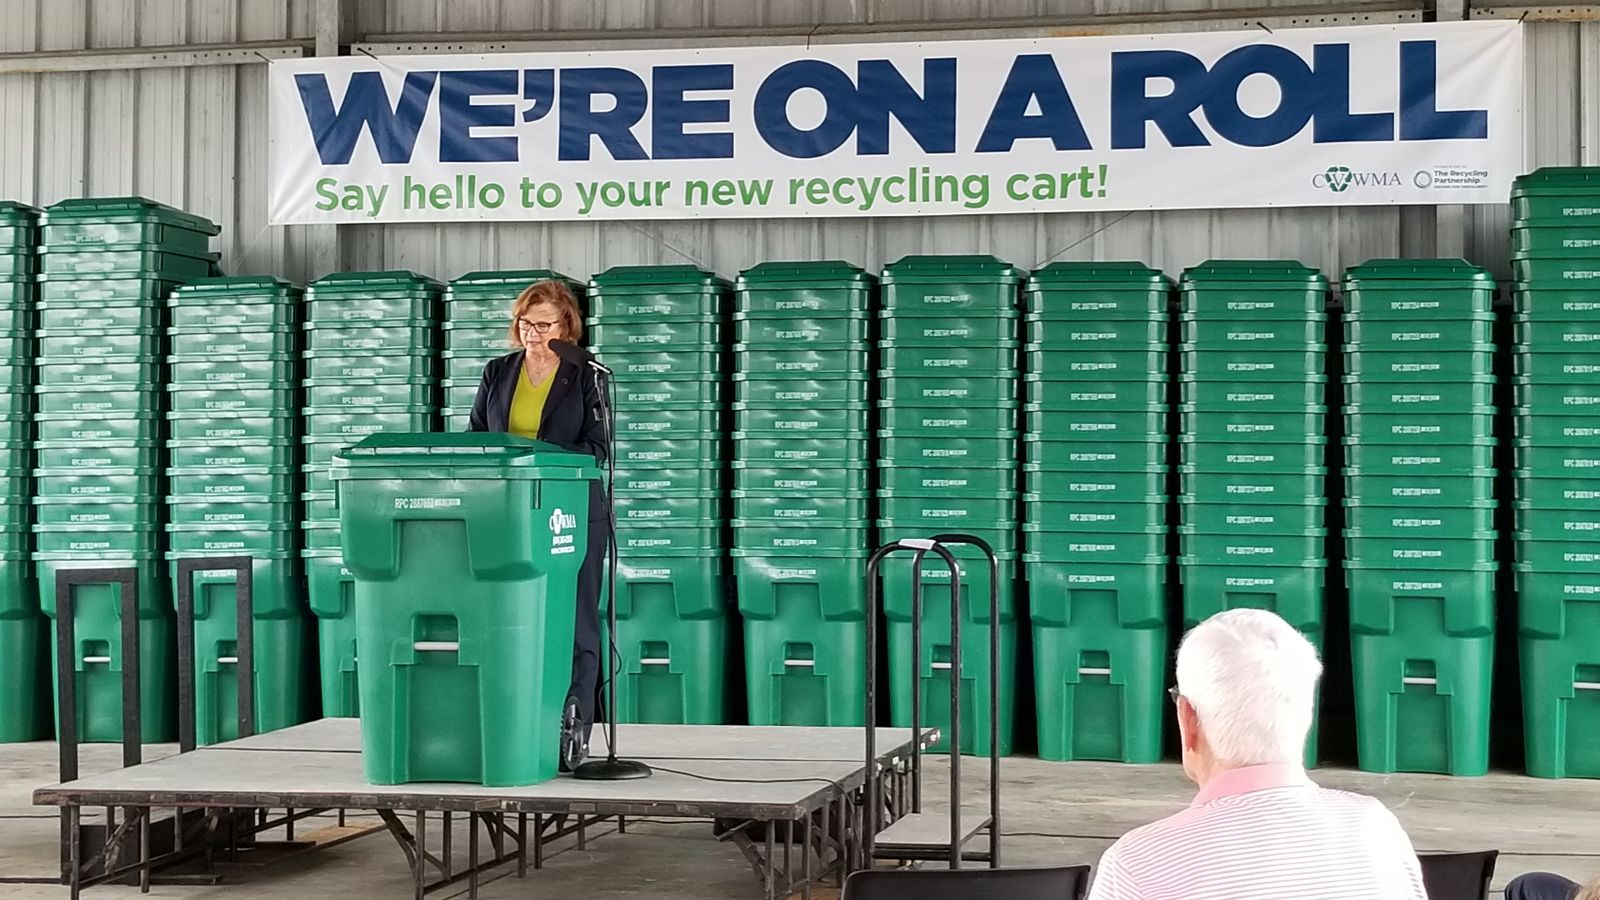 New recycling cans in Henrico, Richmond, but not Chesterfield Axios